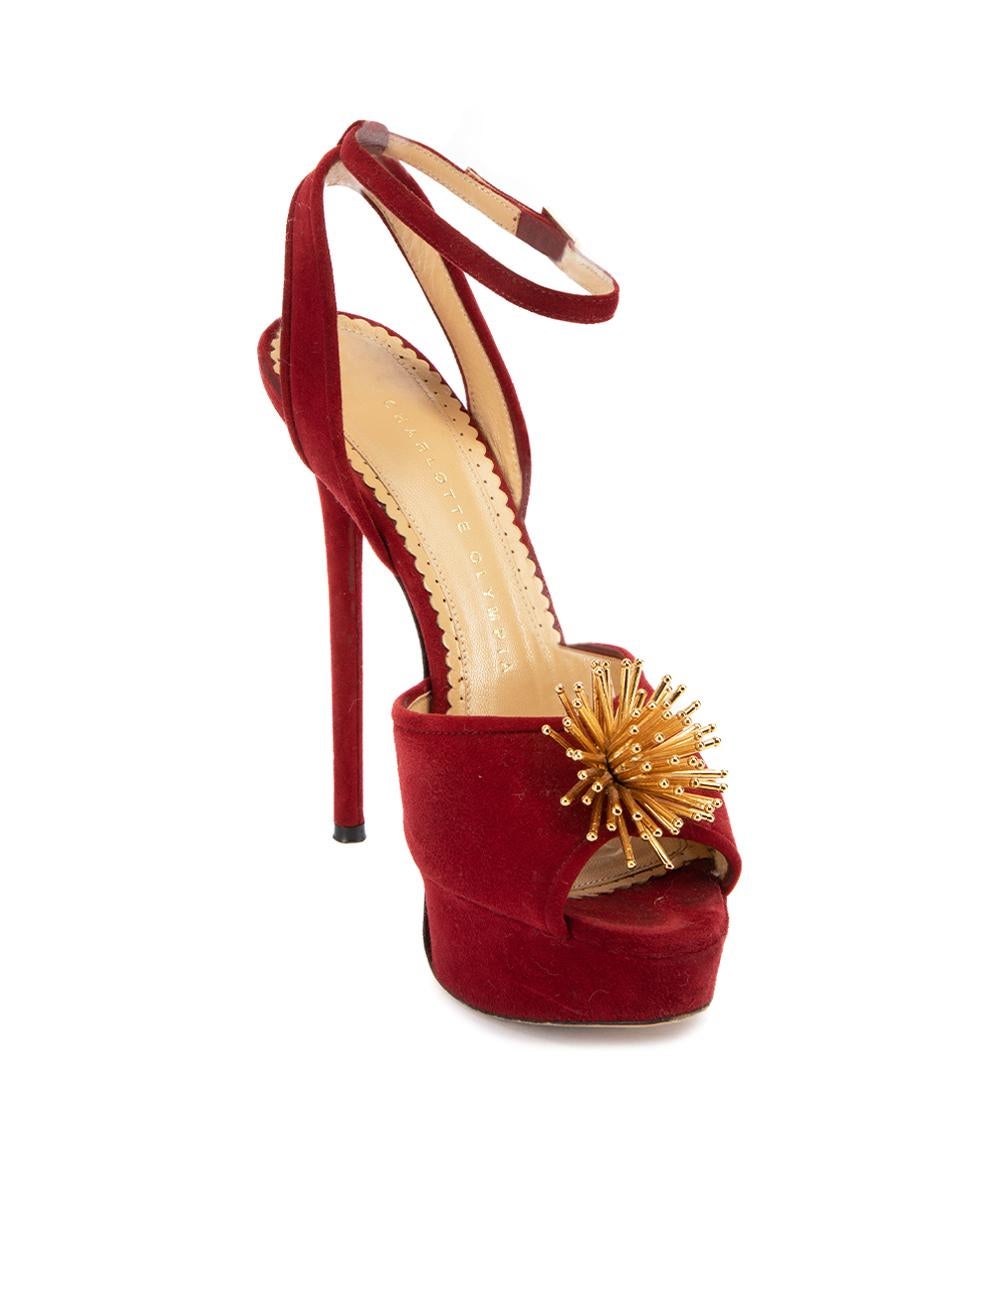 CONDITION is Very good. Minimal wear to heels is evident. Minimal wear to the suede exterior and ankle strap. There is also an imprint to the toe point and wear to the outsole on this used Charlotte Olympia designer resale item. This item comes with